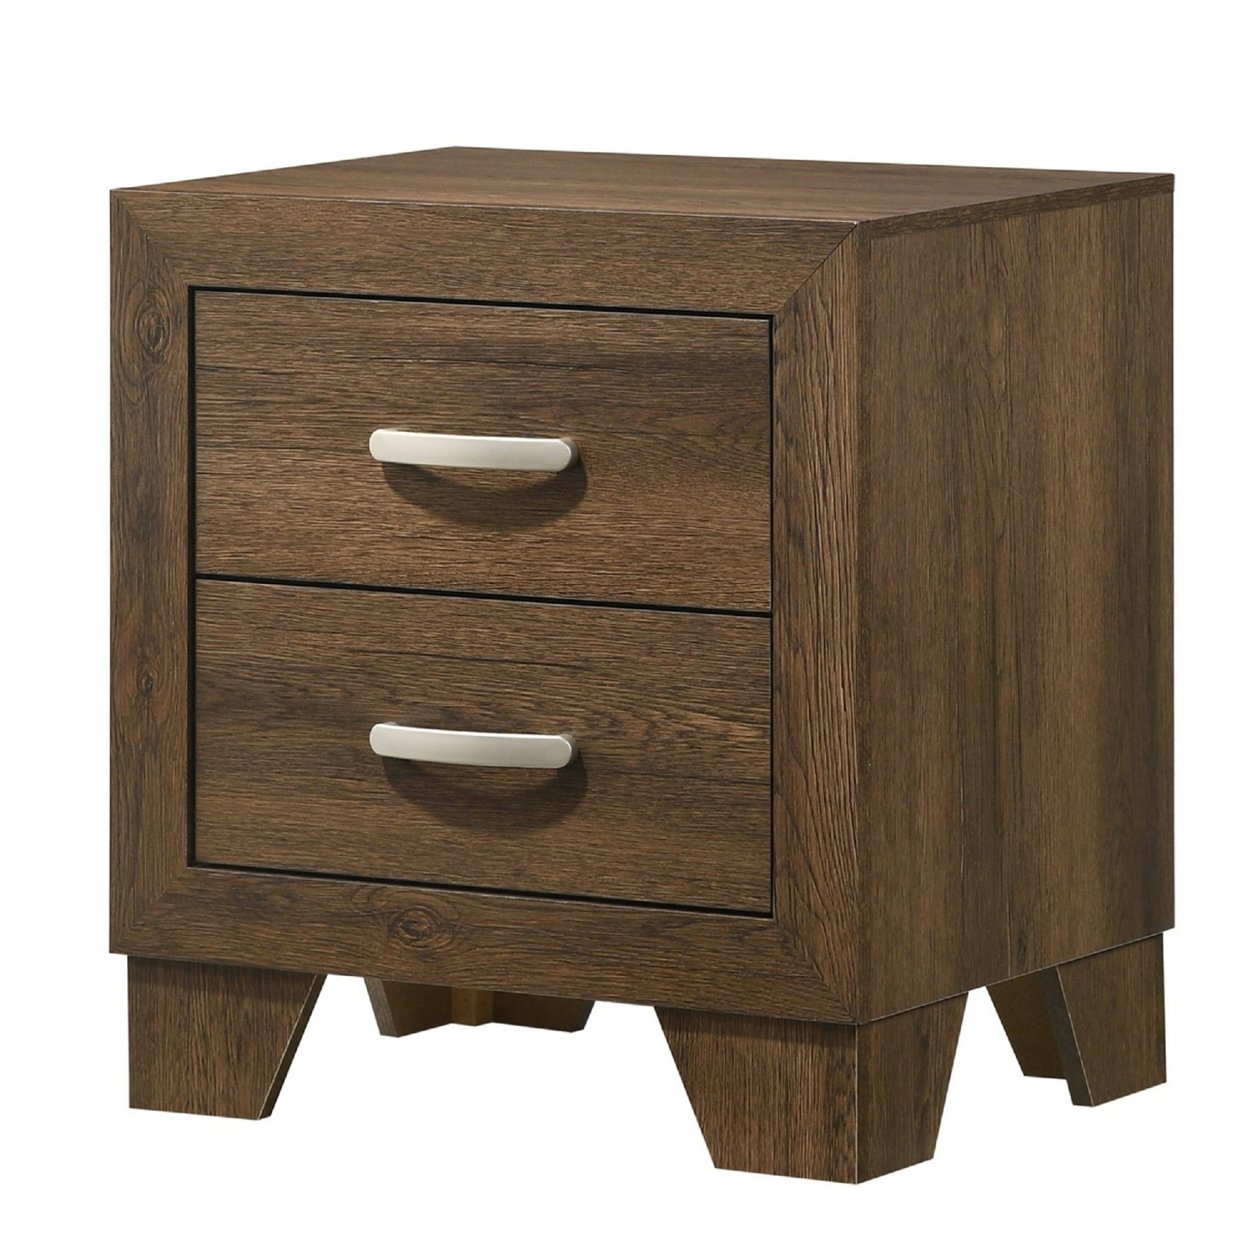 Transitional Style Wooden Nightstand With 2 Drawers And Metal Handles,Brown- Saltoro Sherpi